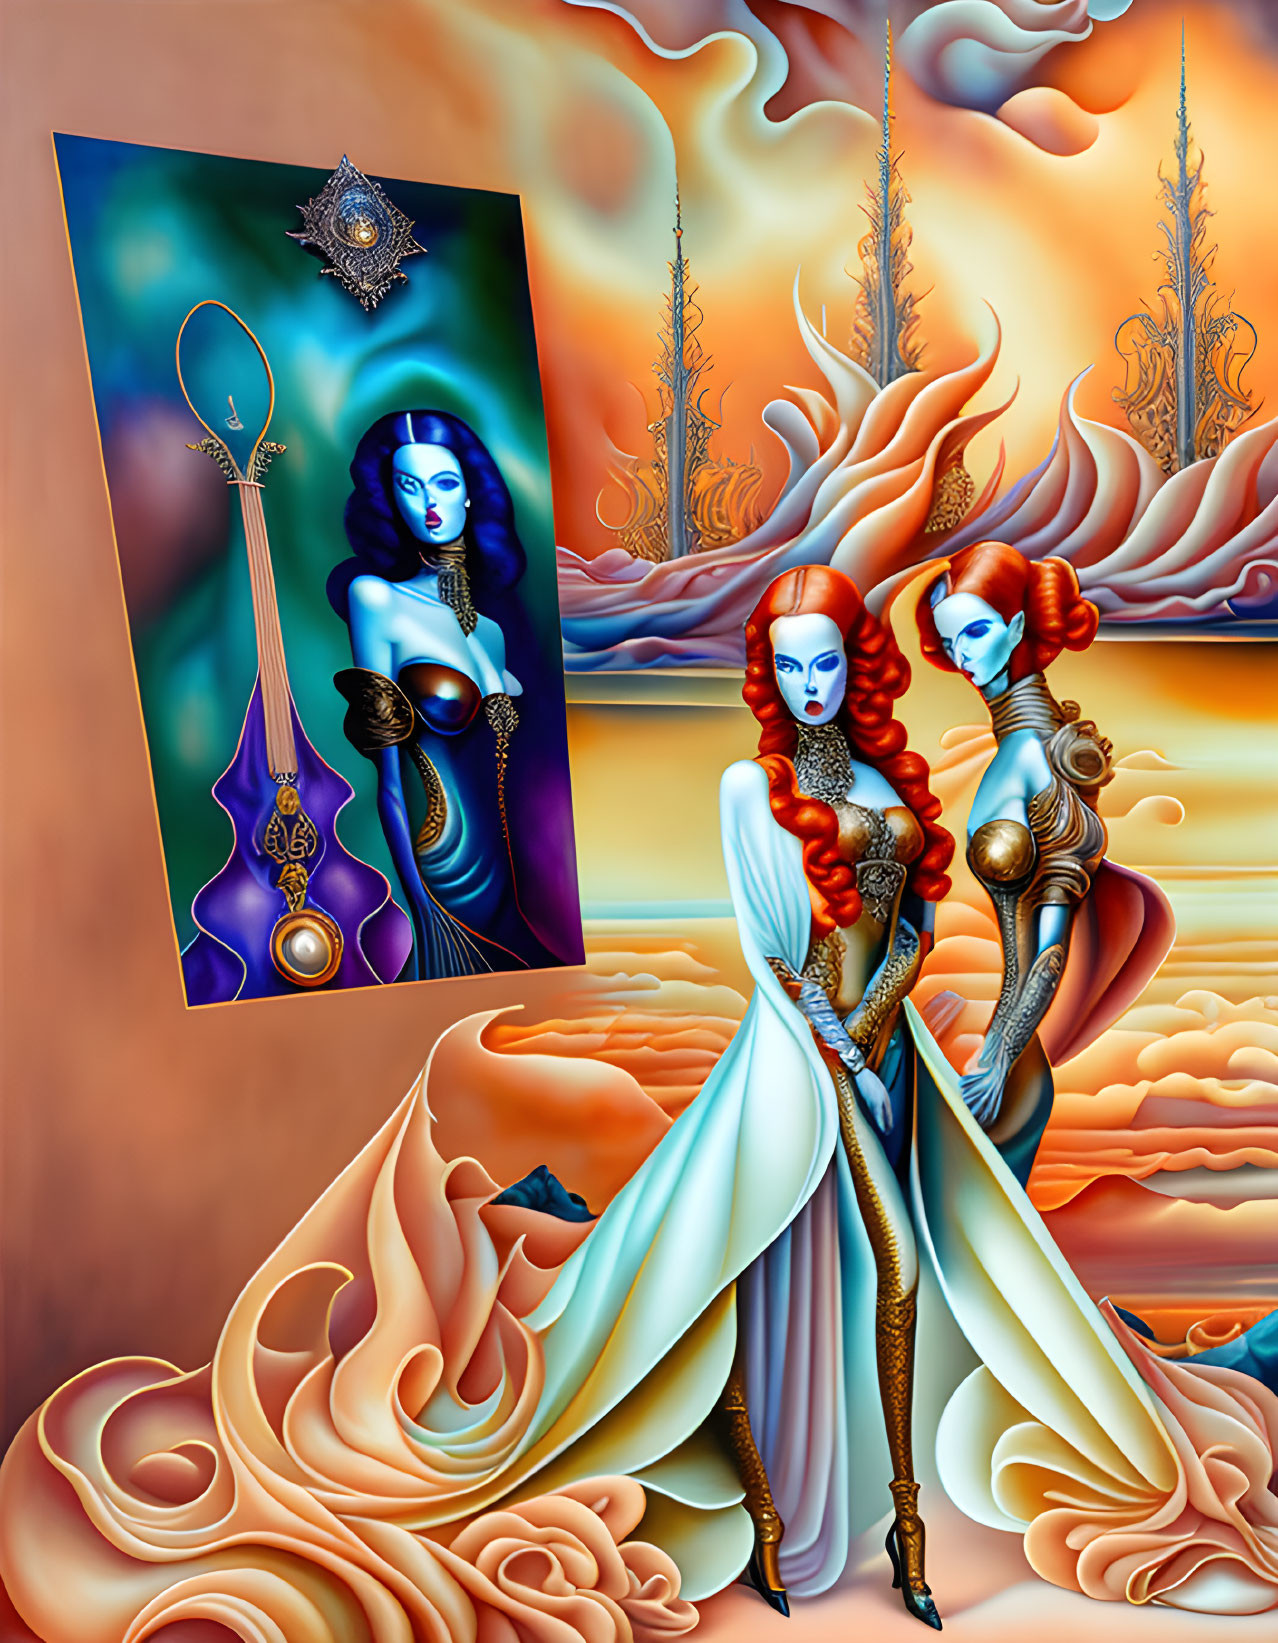 Two Stylized Female Figures in Elaborate Costumes with Fantasy Landscape